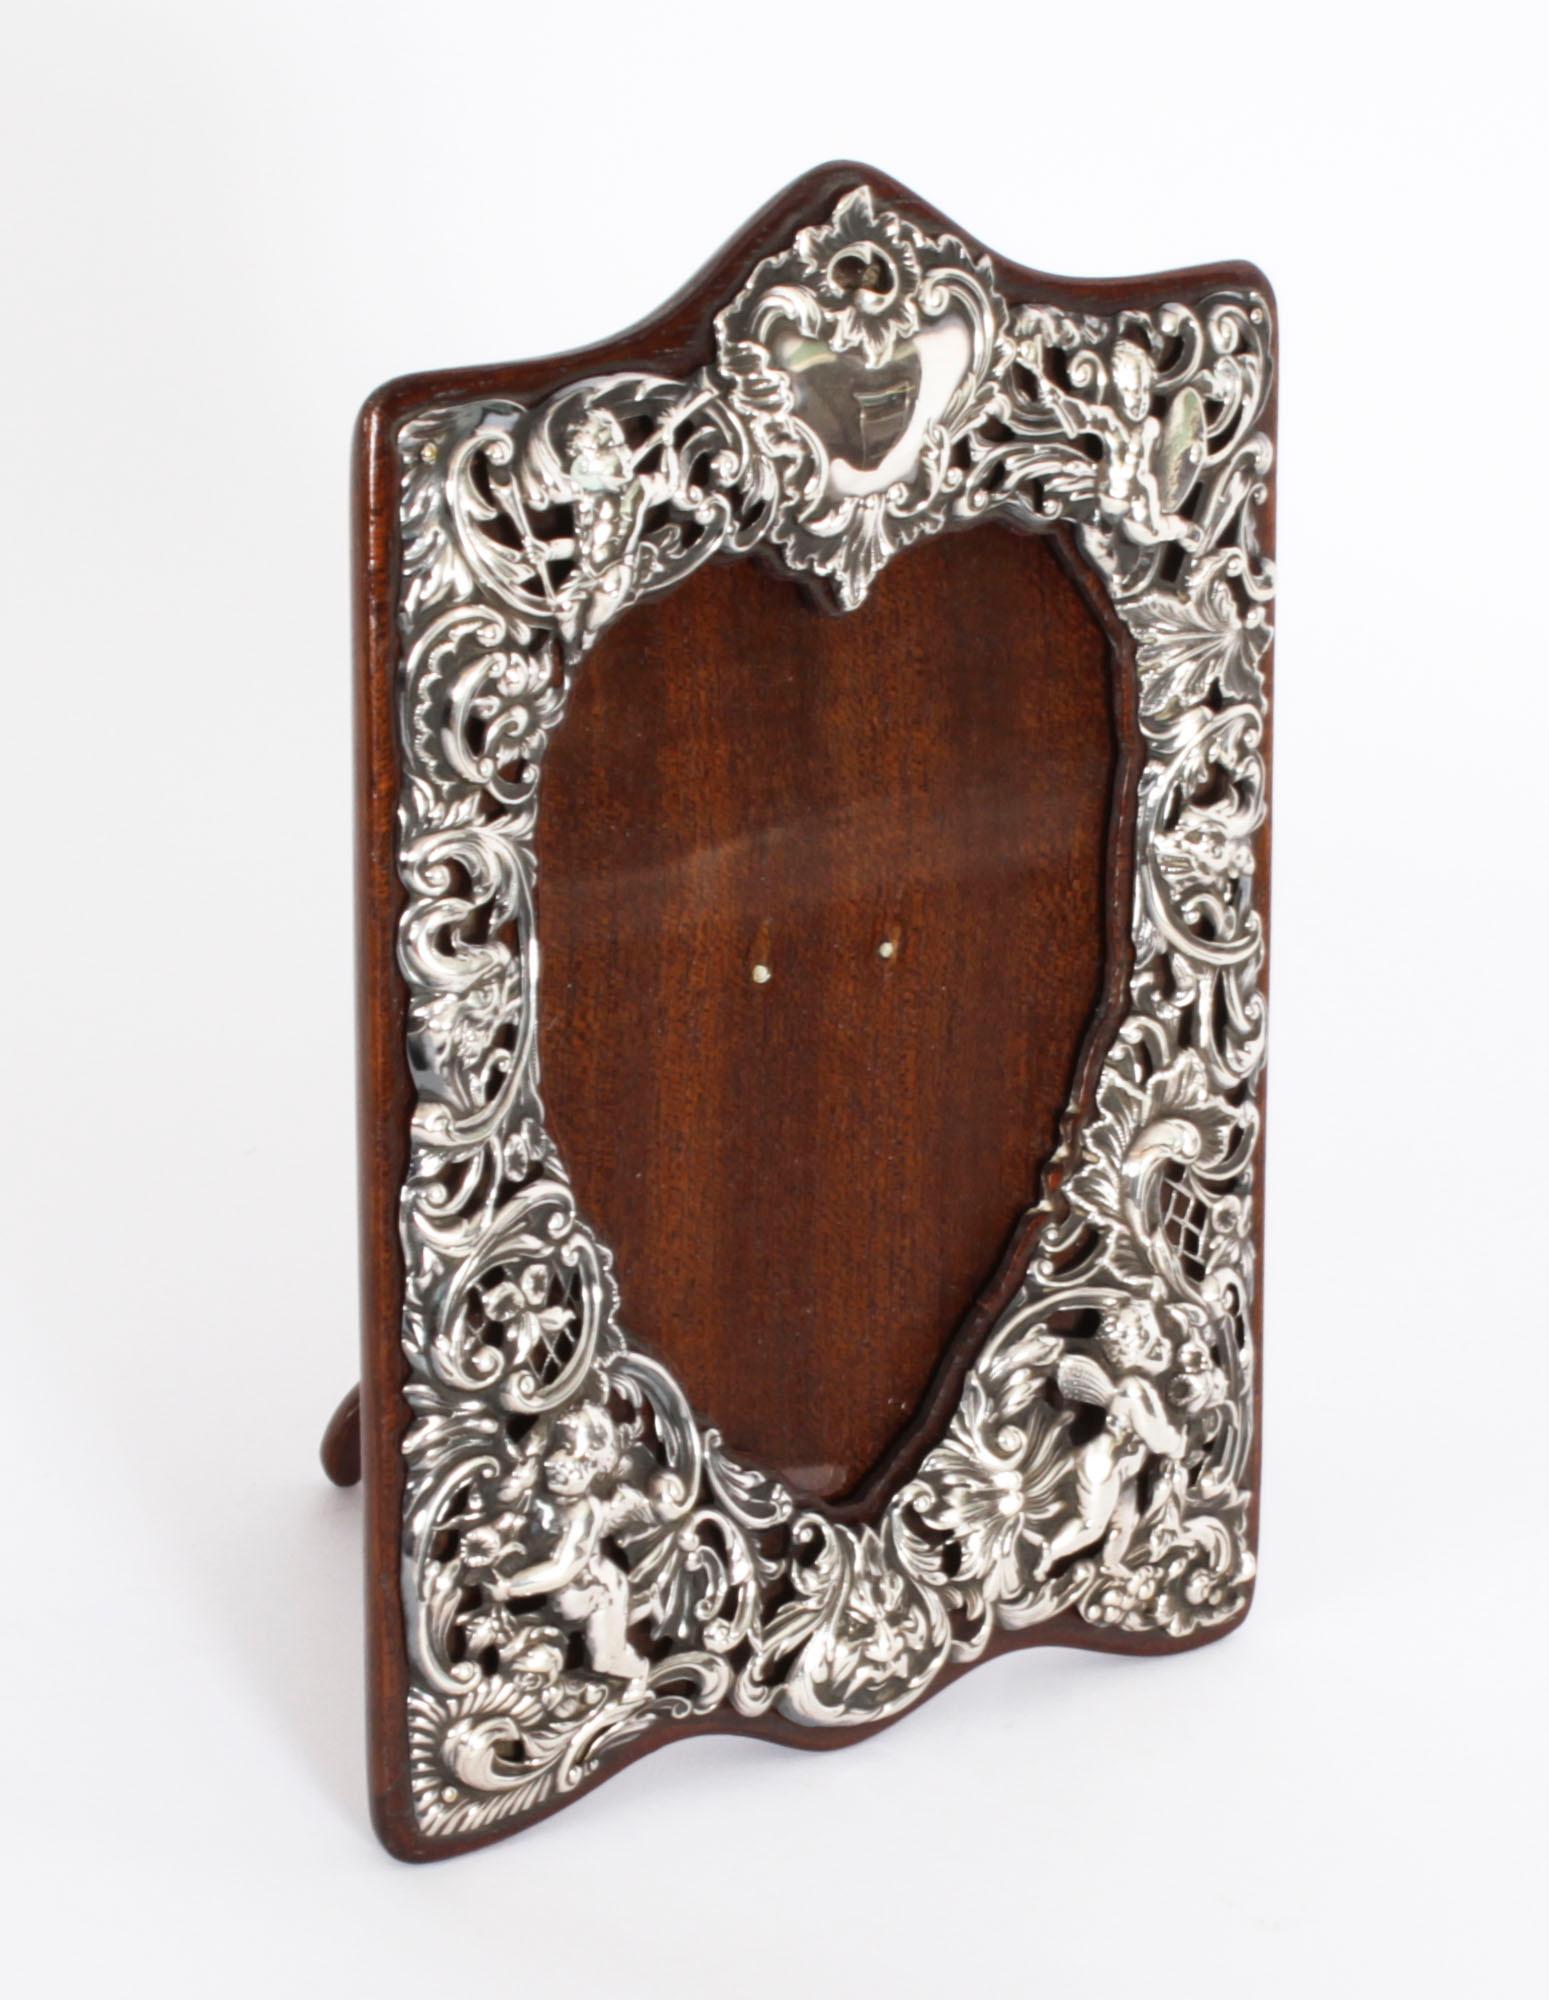 A superb antique Victorian sterling silver photograph frame,  with makers marks for the renowned silversmith William Comyns, and hallmarks for London 1897
 
Beautifully portrait  frame decorated with  pierced and embossed deoration in the Rococo